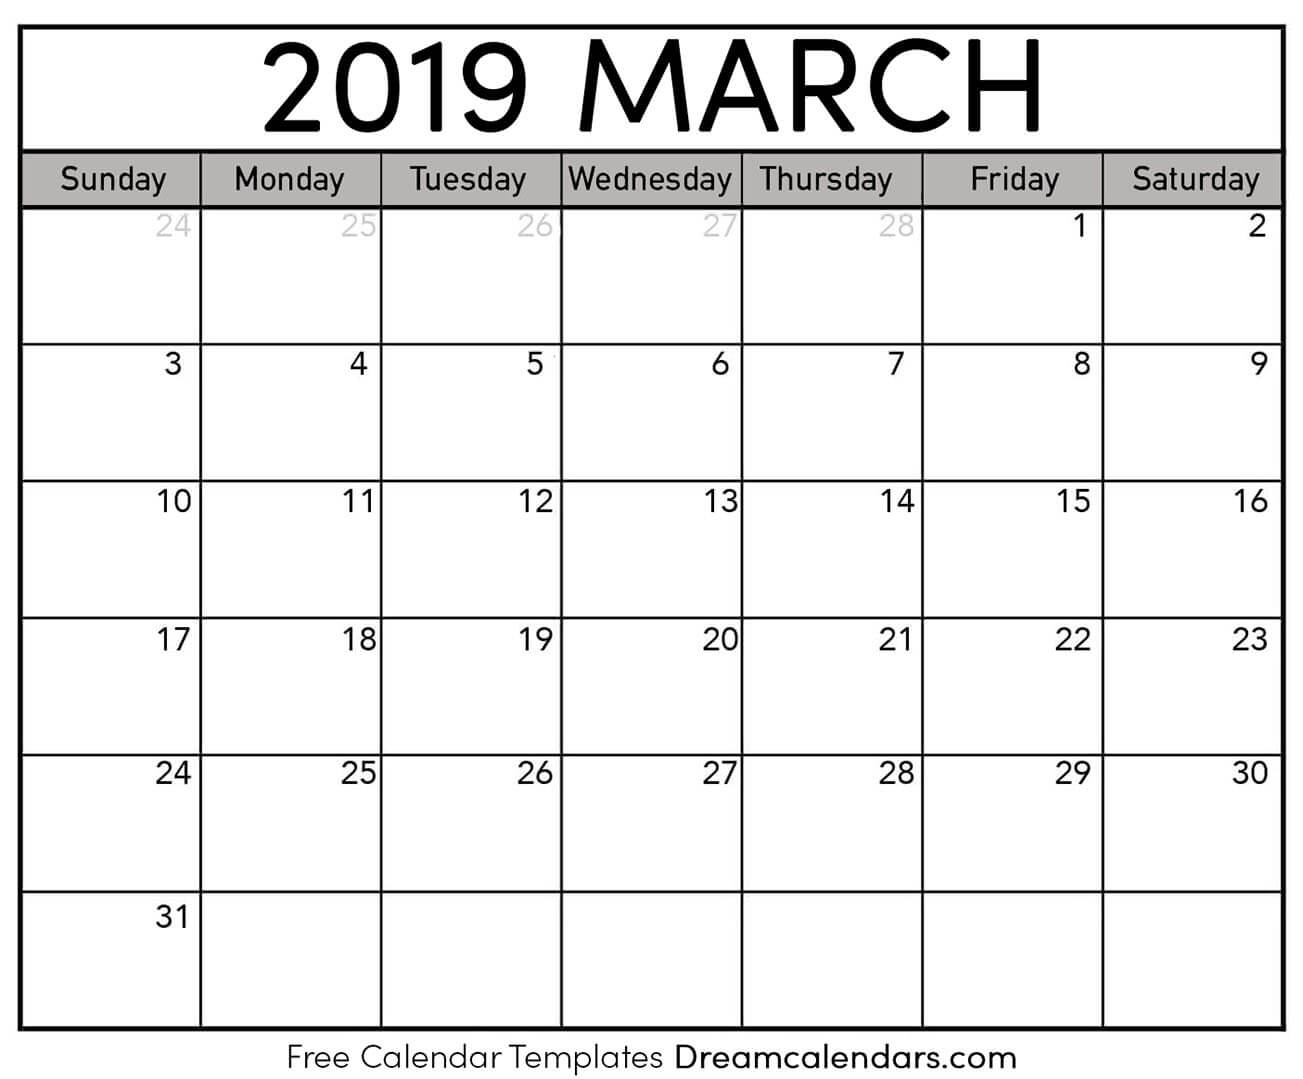 March 2019 Calendar Free Blank Printable With Holidays